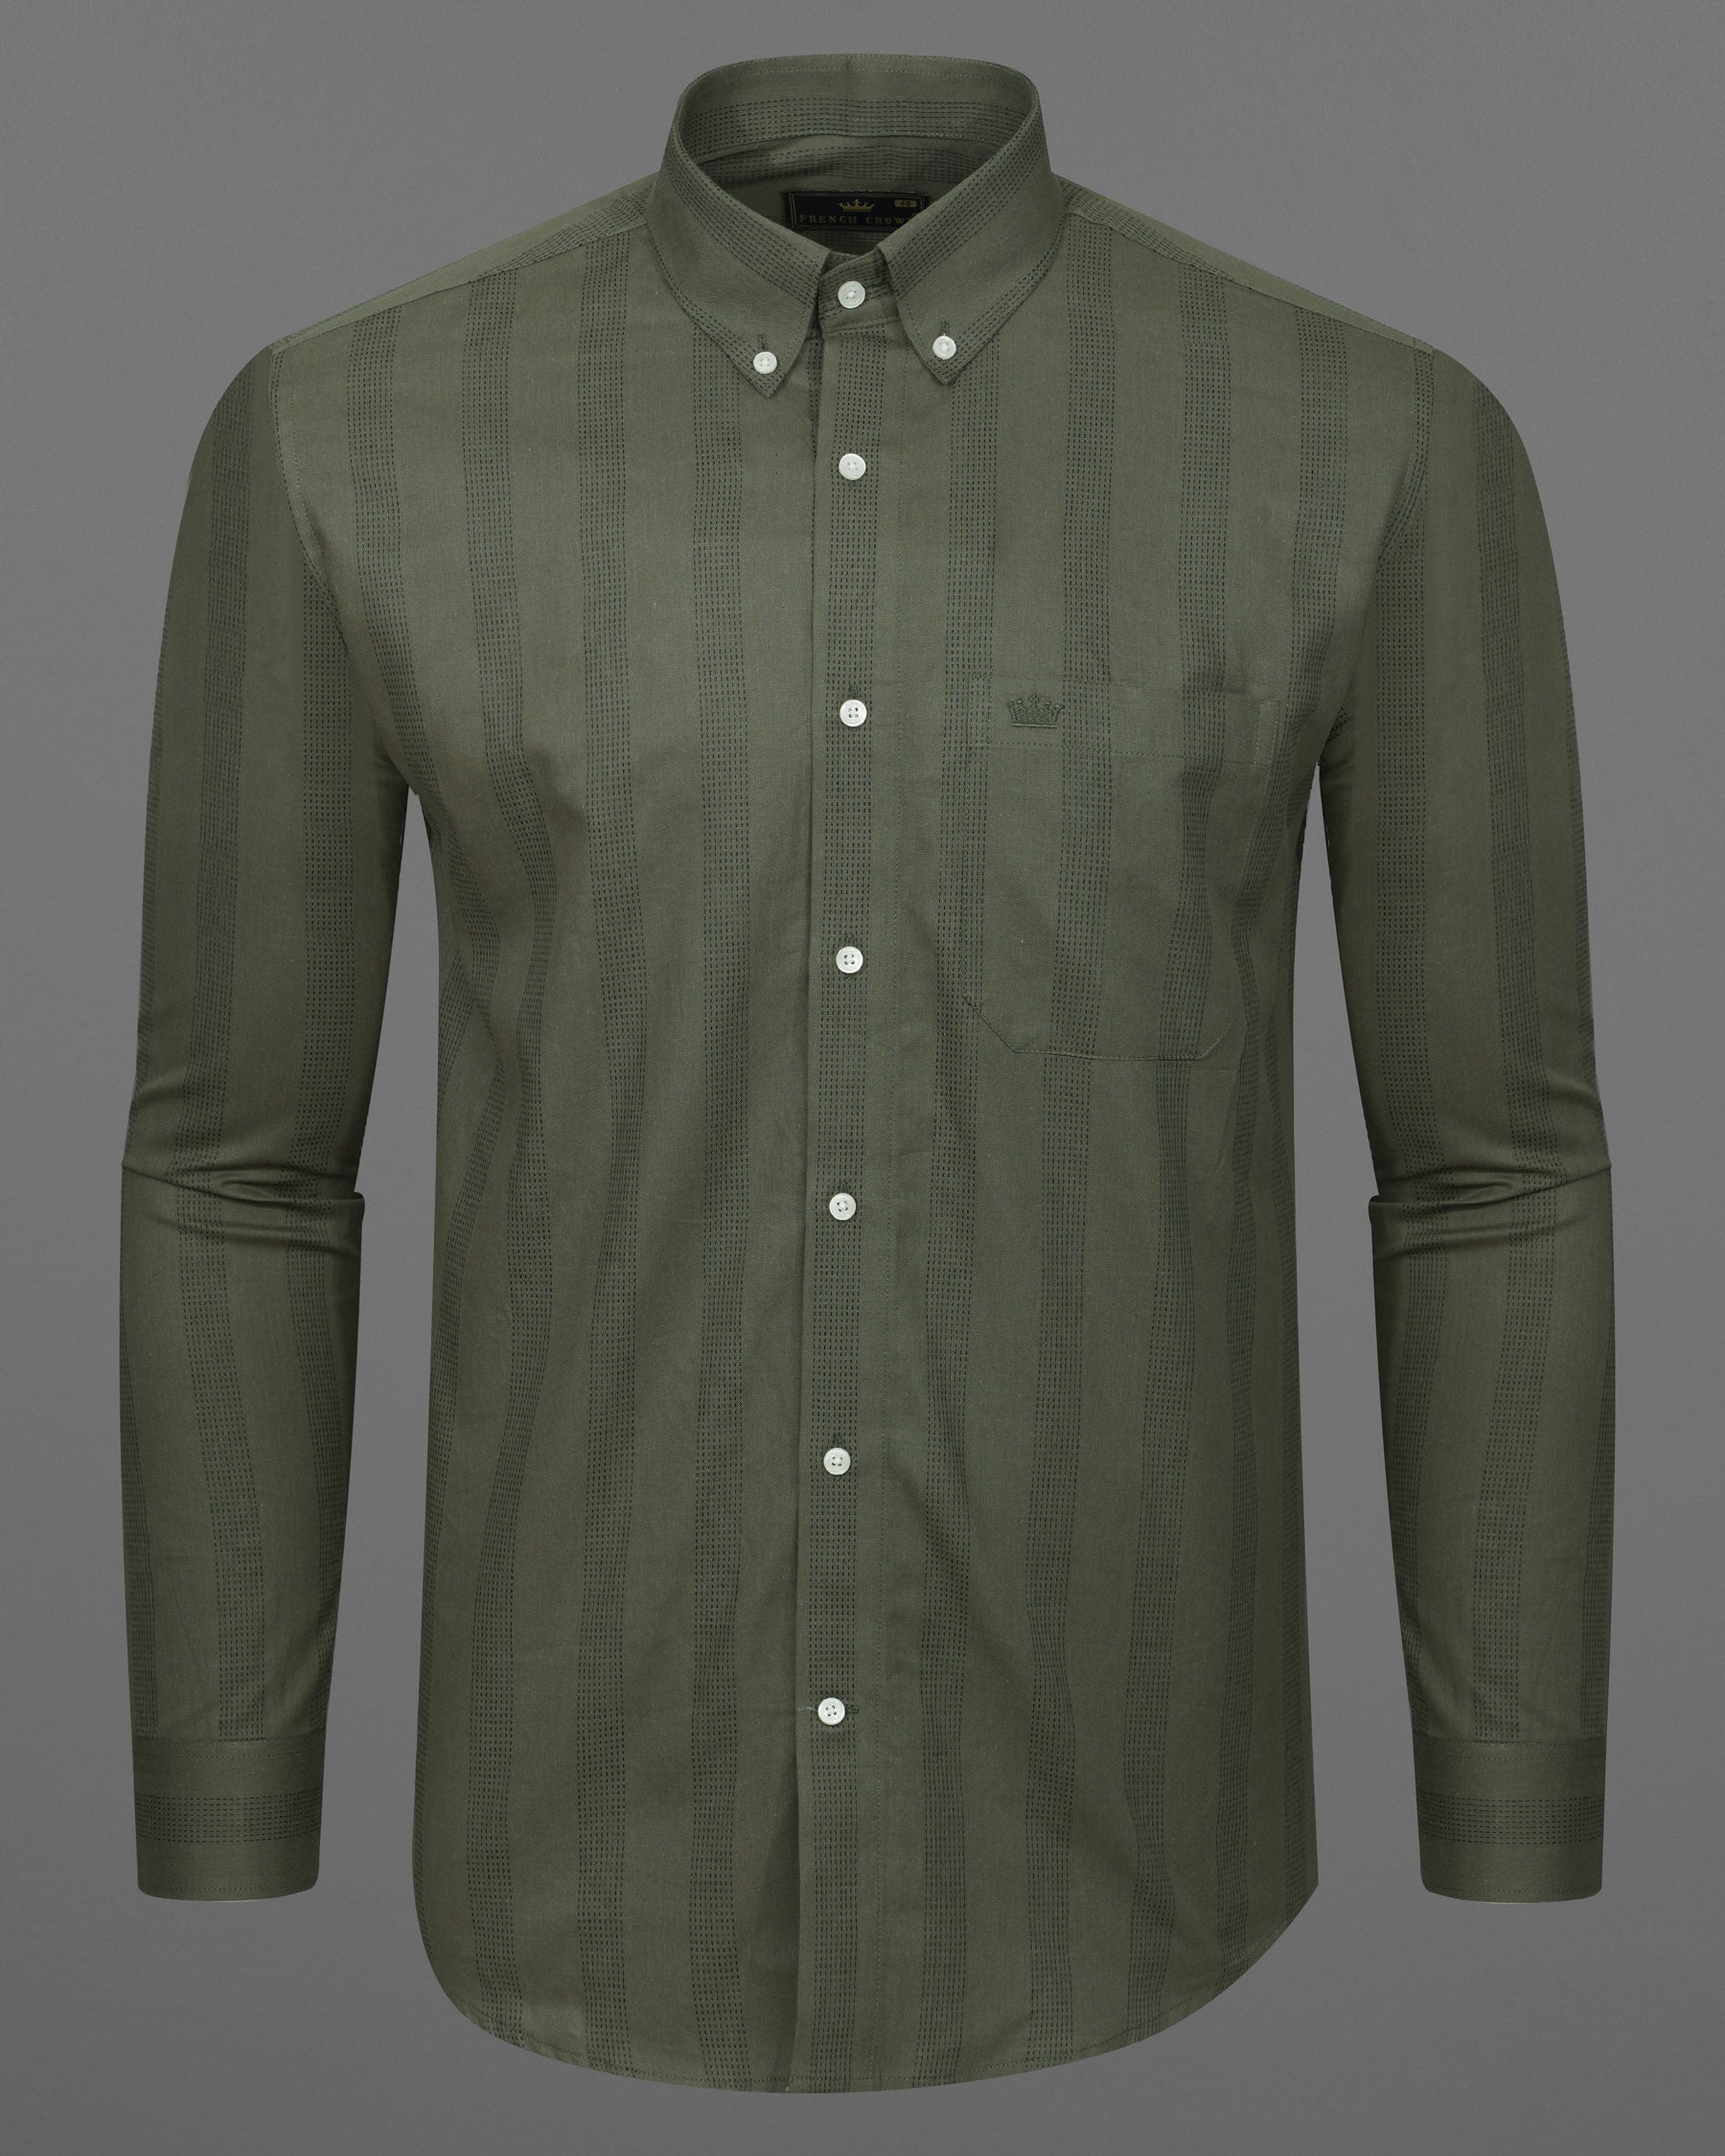 Kelp Green with Black Implied Lined Twill Premium Cotton Shirt 7570-BD-38,7570-BD-38,7570-BD-39,7570-BD-39,7570-BD-40,7570-BD-40,7570-BD-42,7570-BD-42,7570-BD-44,7570-BD-44,7570-BD-46,7570-BD-46,7570-BD-48,7570-BD-48,7570-BD-50,7570-BD-50,7570-BD-52,7570-BD-52